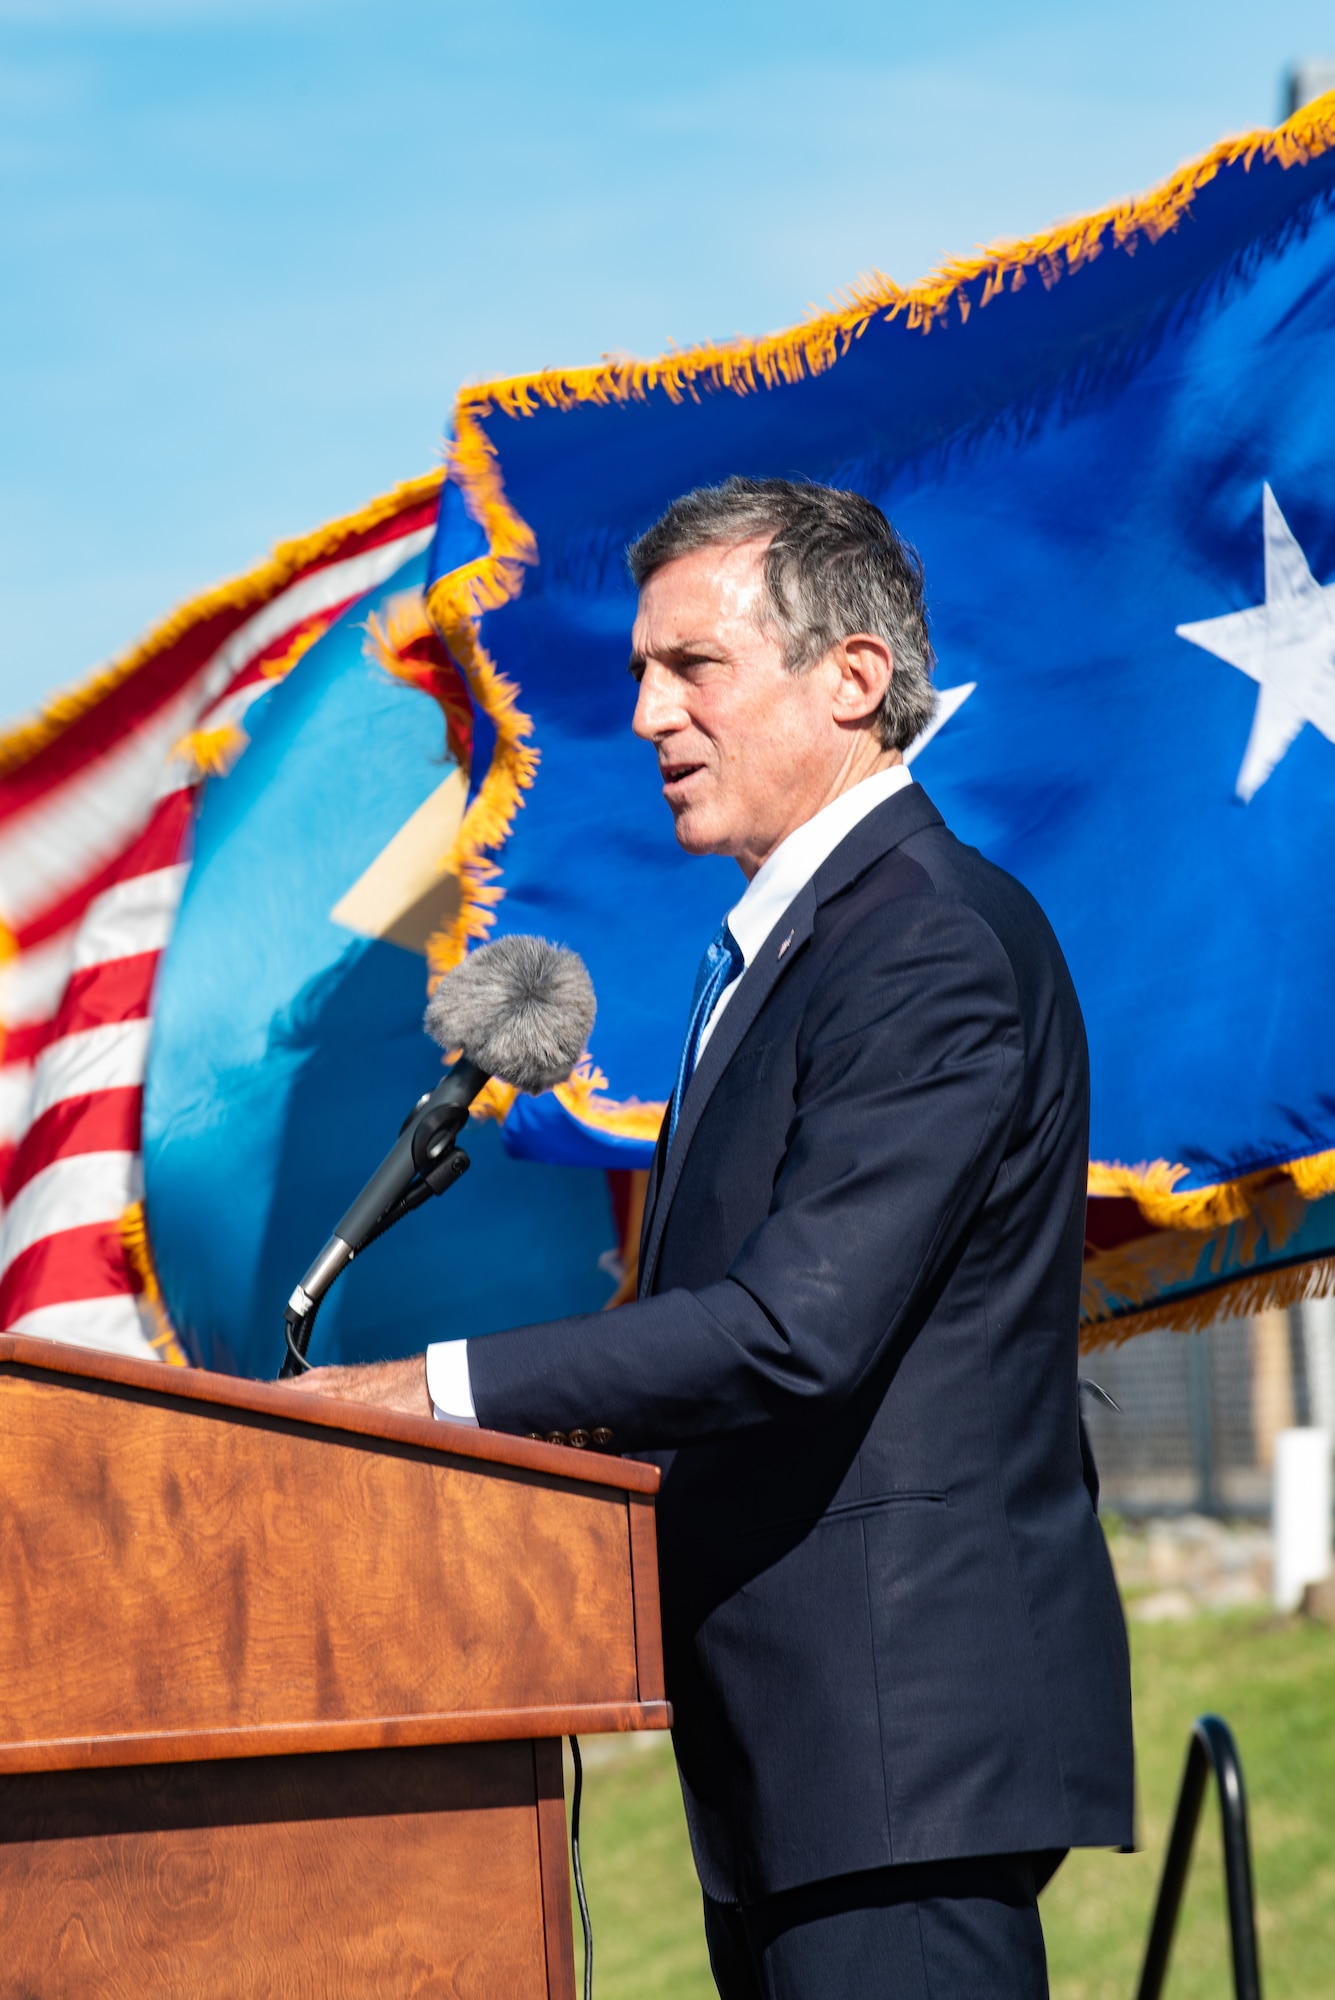 Delaware Gov. John Carney memorializes MG Timmons, Oct. 15, 2020. MG Timmons was remembered at a celebration of life ceremony that took place on the flightline of the Delaware National Guard Aviation Facility, in New Castle, Del. (U.S. Air National Guard photo by Mr. Mitch Topal)